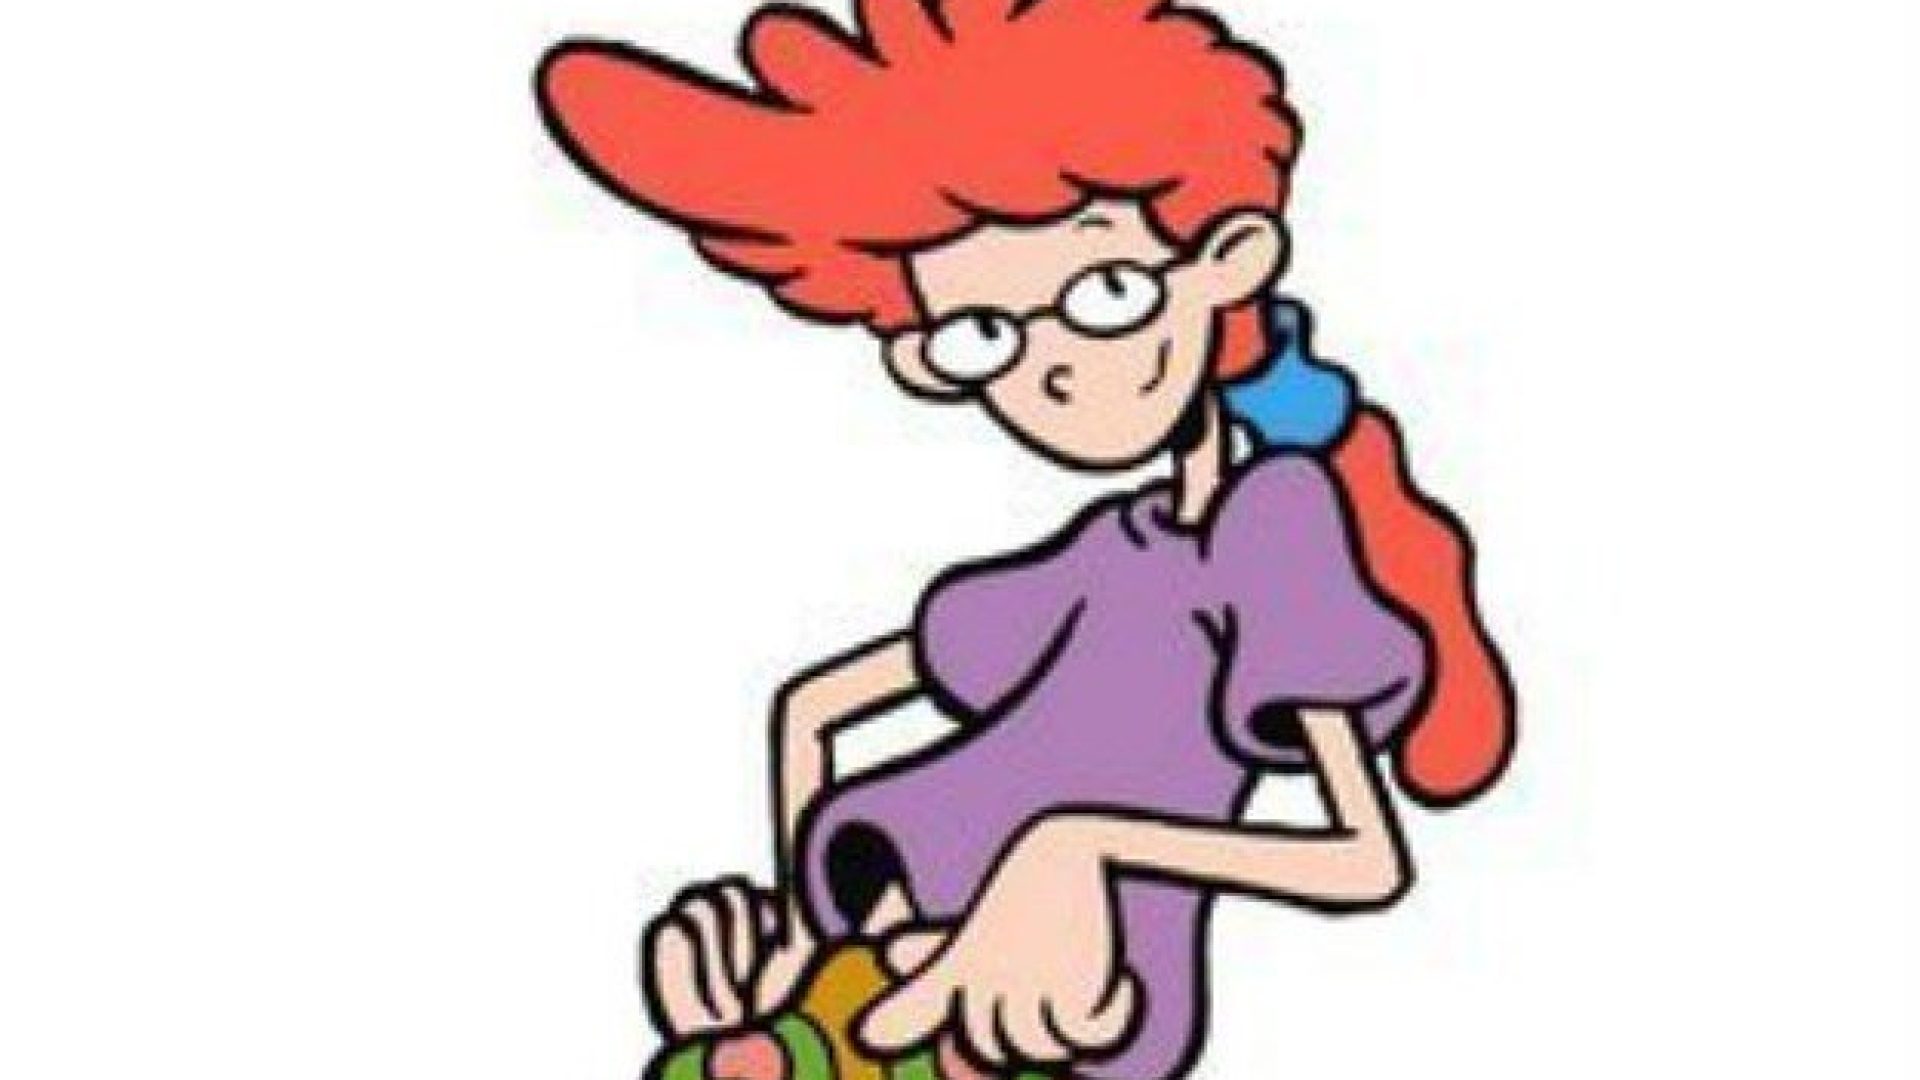 What The Woman Who Voiced Our Beloved Pepper Ann Looks Like In Real Life Hellogiggleshellogiggles